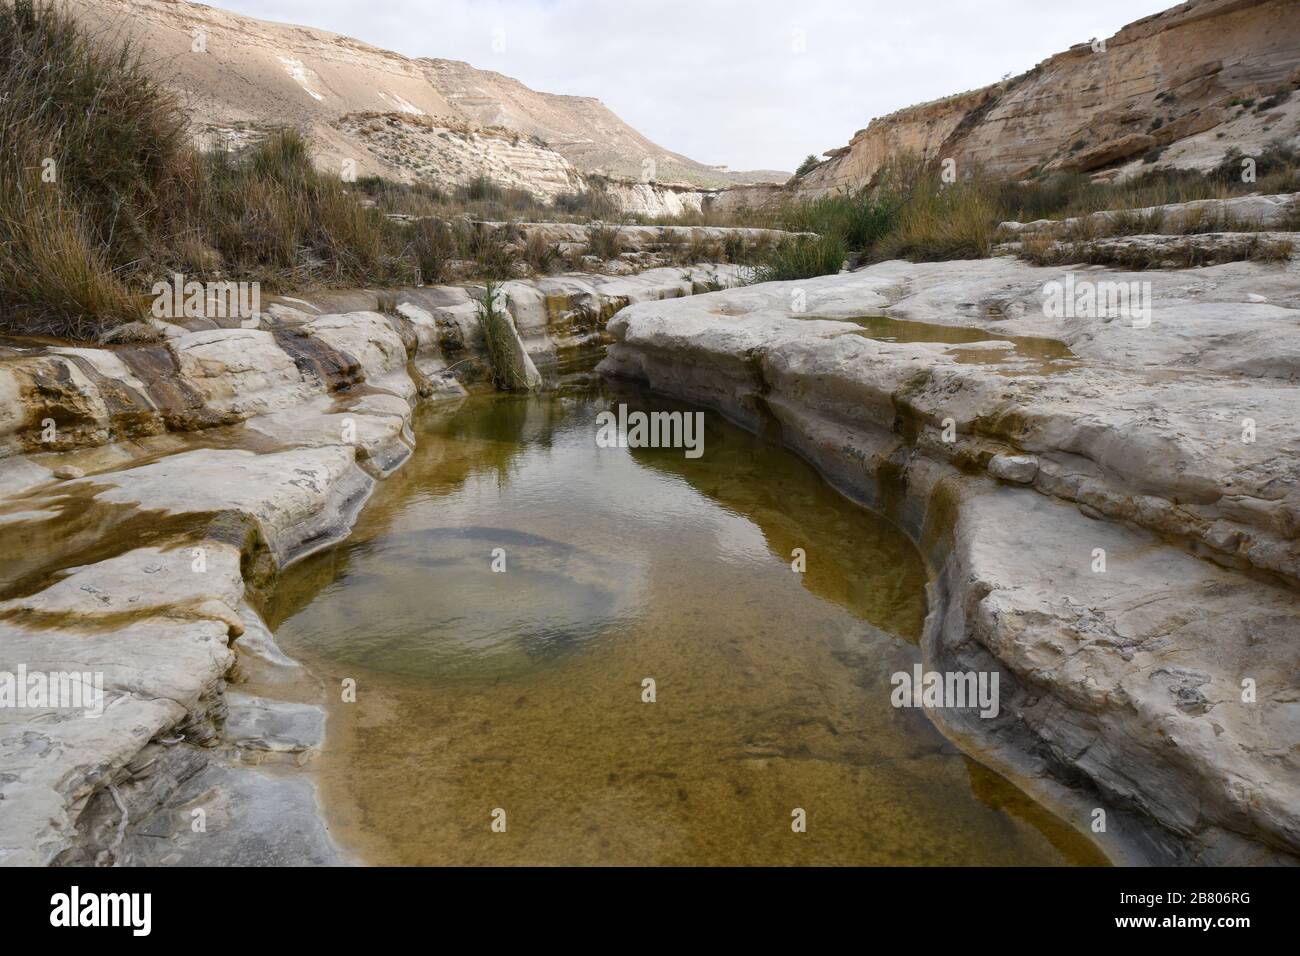 Wadi Hawarim, Negev Desert, Israel. Flood water collects in the stone pools Stock Photo